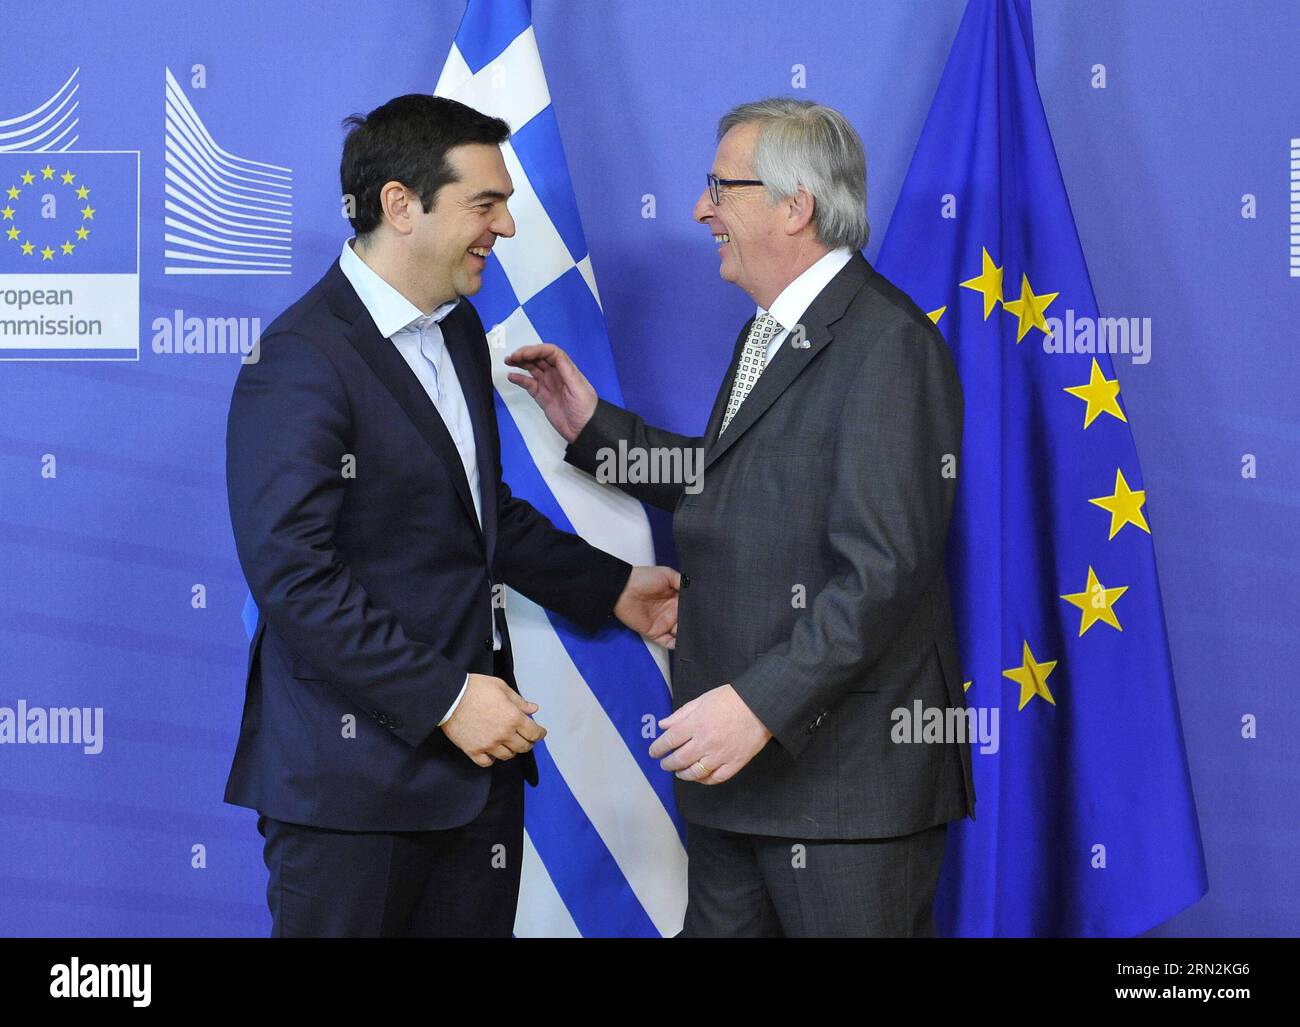 (150313) -- BRUSSELS, March 13, 2015 -- Greece s Prime Minister Alexis Tsipras (L) meets the European Commission President Jean-Claude Juncker at EU headquarters in Brussels, Beglium, March 13, 2015. ) BELGIUM-BRUSSELS-EU-JUNCKER-GREECE-TSIPRAS YexPingfan PUBLICATIONxNOTxINxCHN   Brussels March 13 2015 Greece S Prime Ministers Alexis Tsipras l Meets The European Commission President Jean Claude Juncker AT EU Headquarters in Brussels Beglium March 13 2015 Belgium Brussels EU Juncker Greece Tsipras  PUBLICATIONxNOTxINxCHN Stock Photo